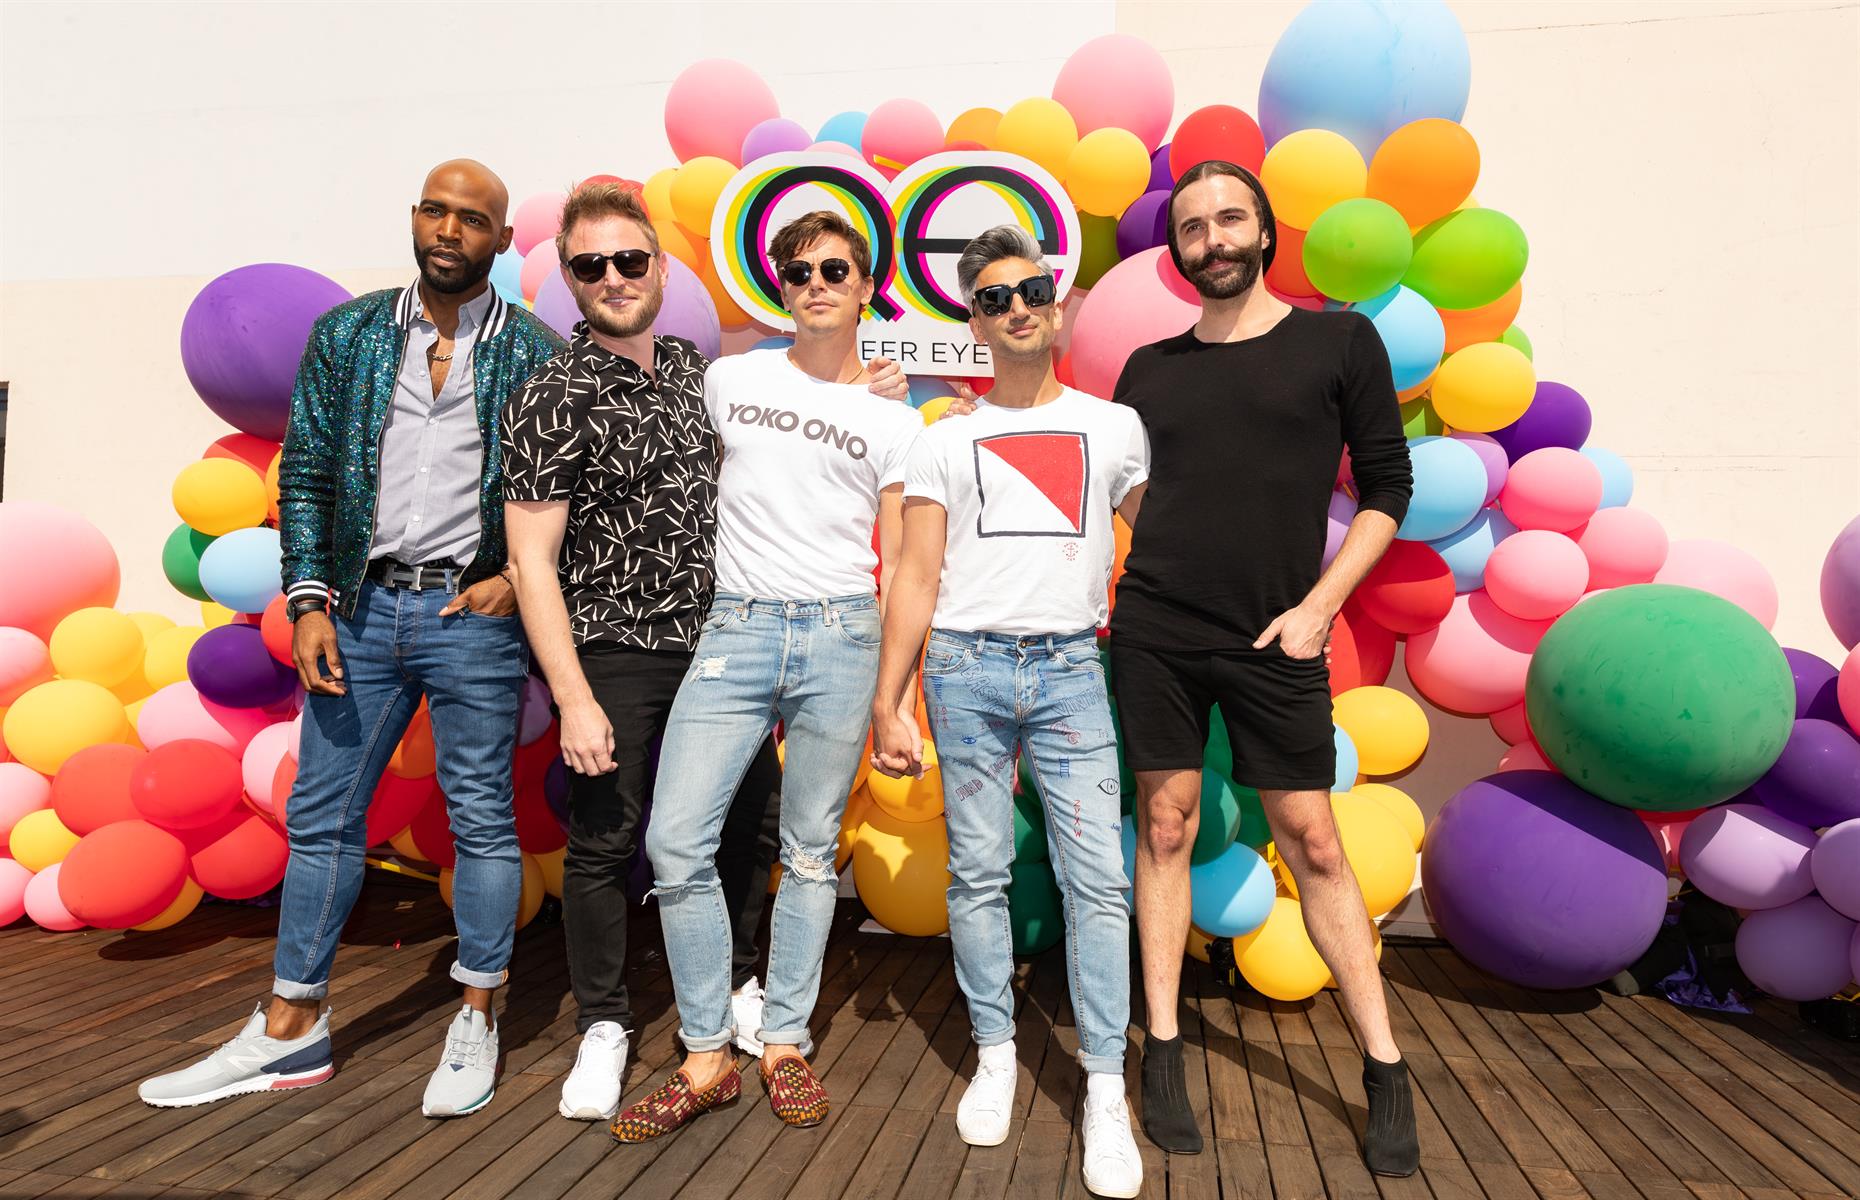 2018: Cover FX in Queer Eye